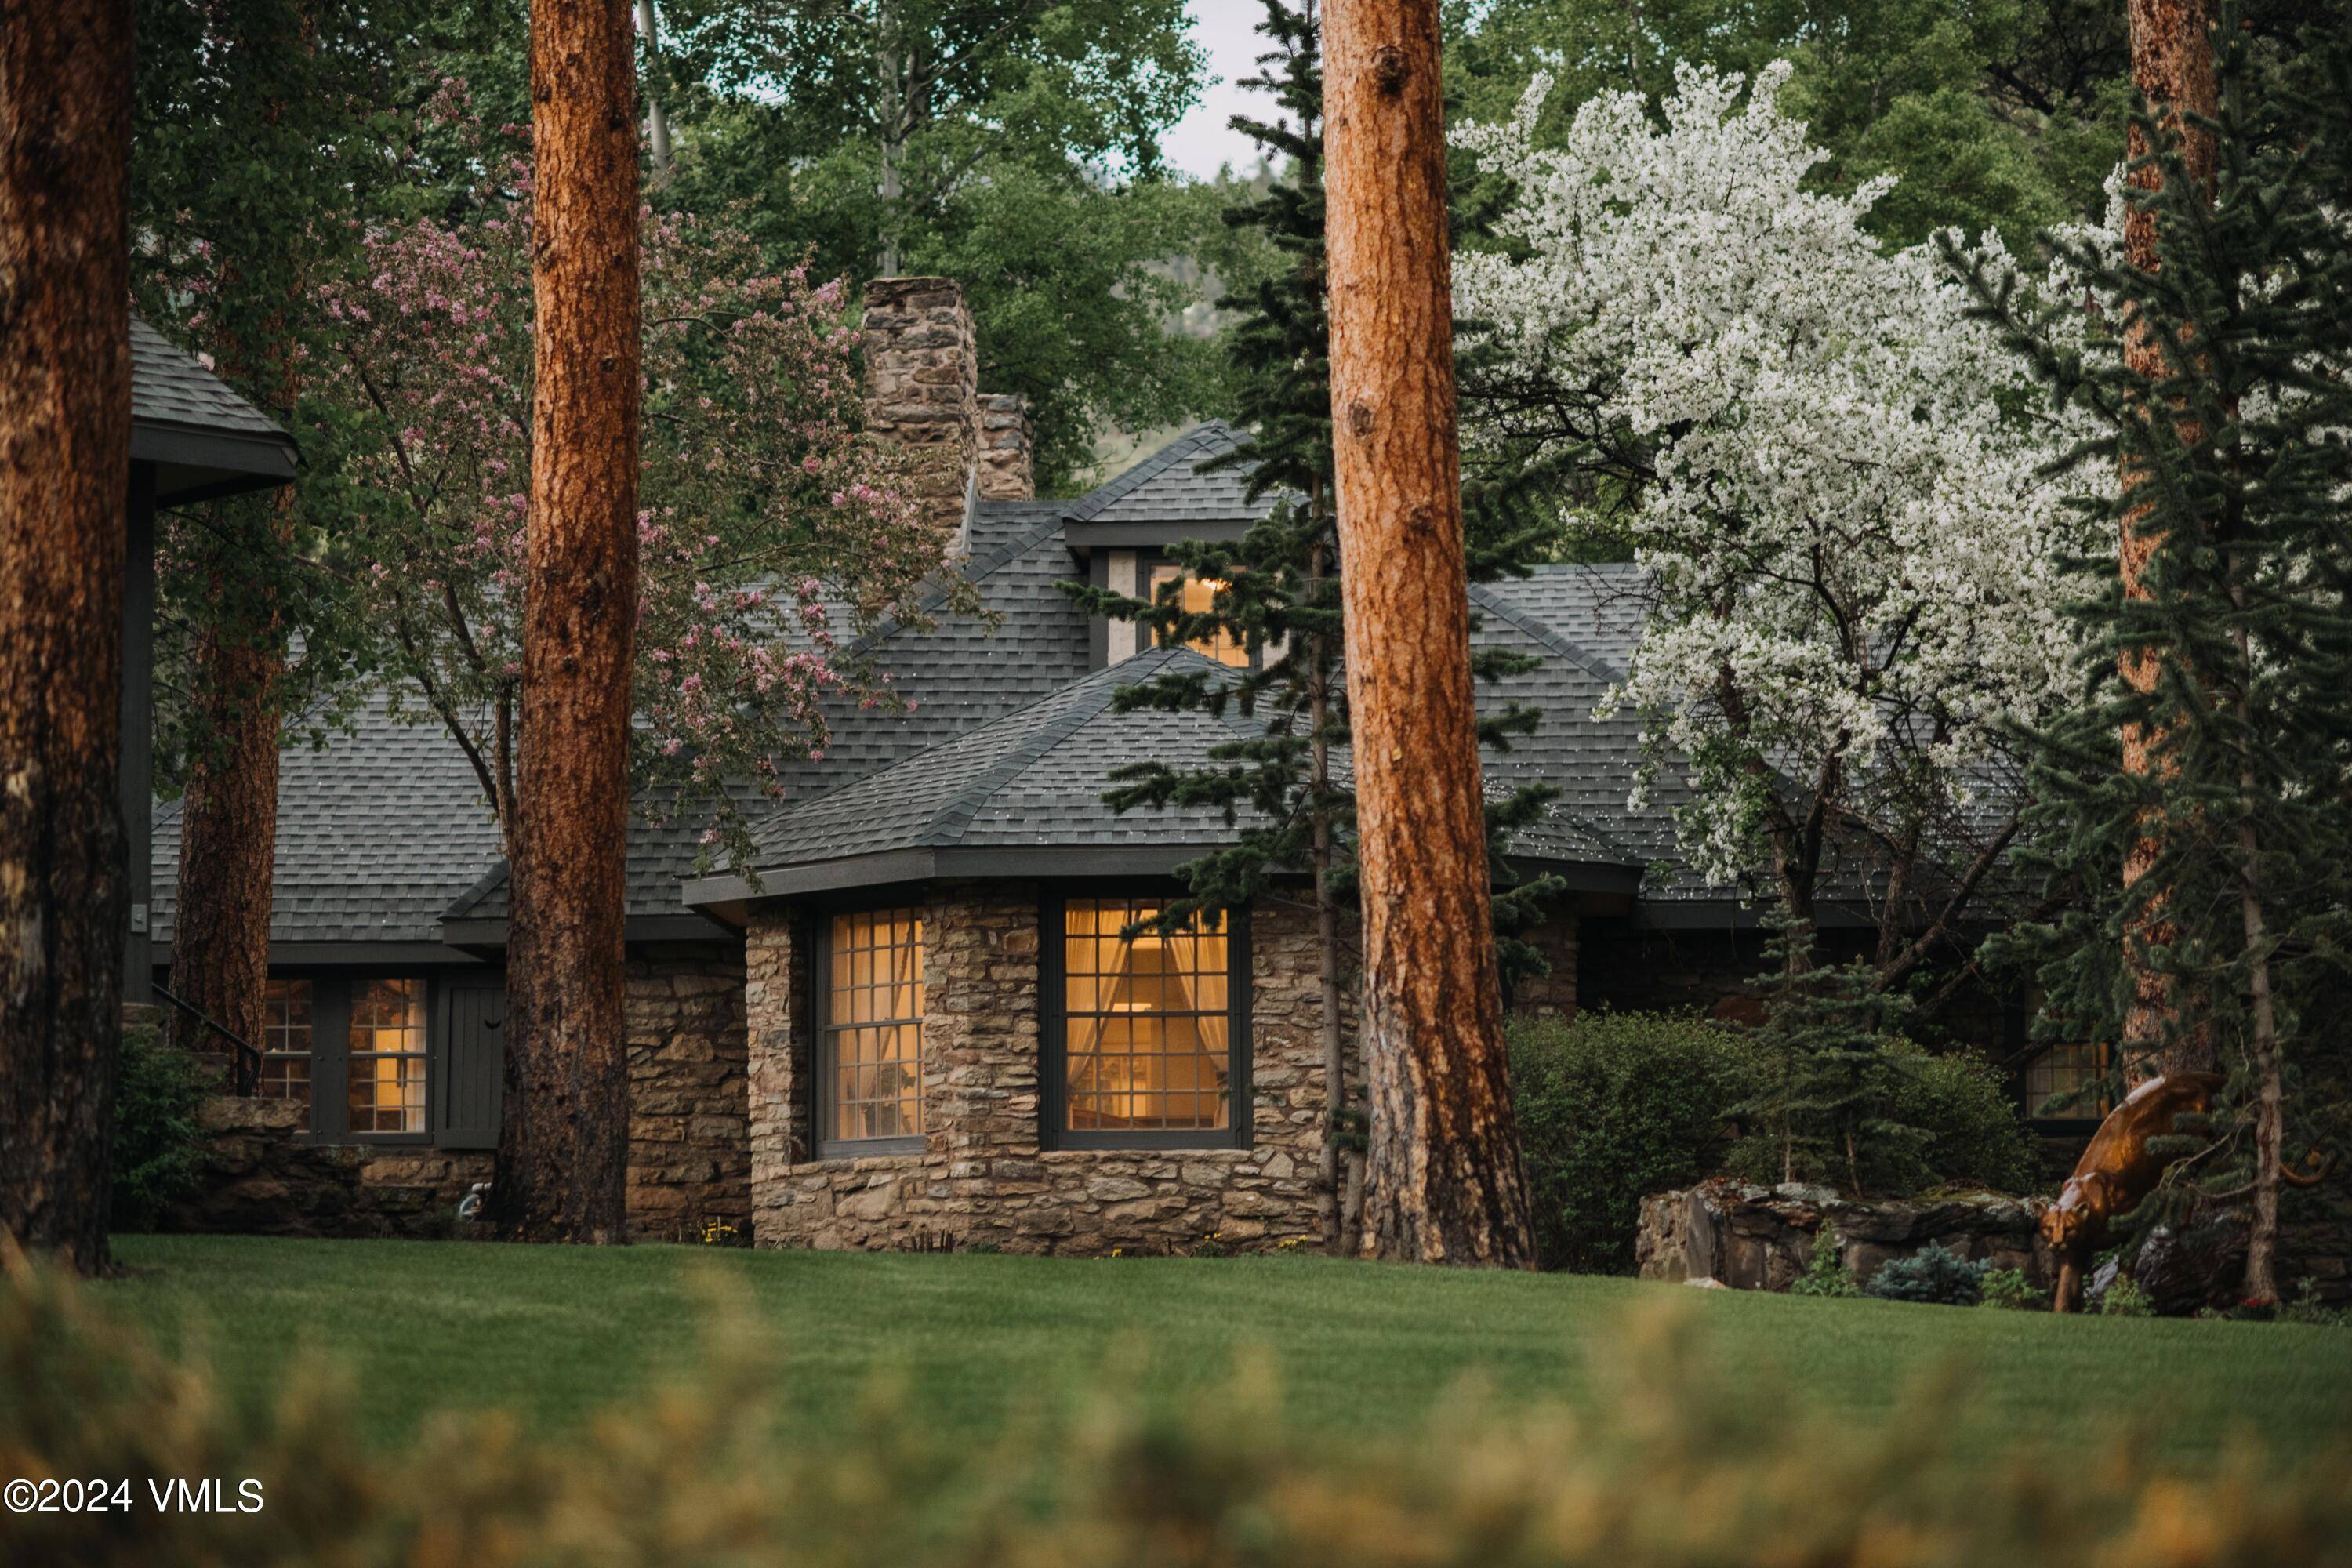 For more than a century, Greystone Estate has been renowned as one of Colorado's true legacy properties.